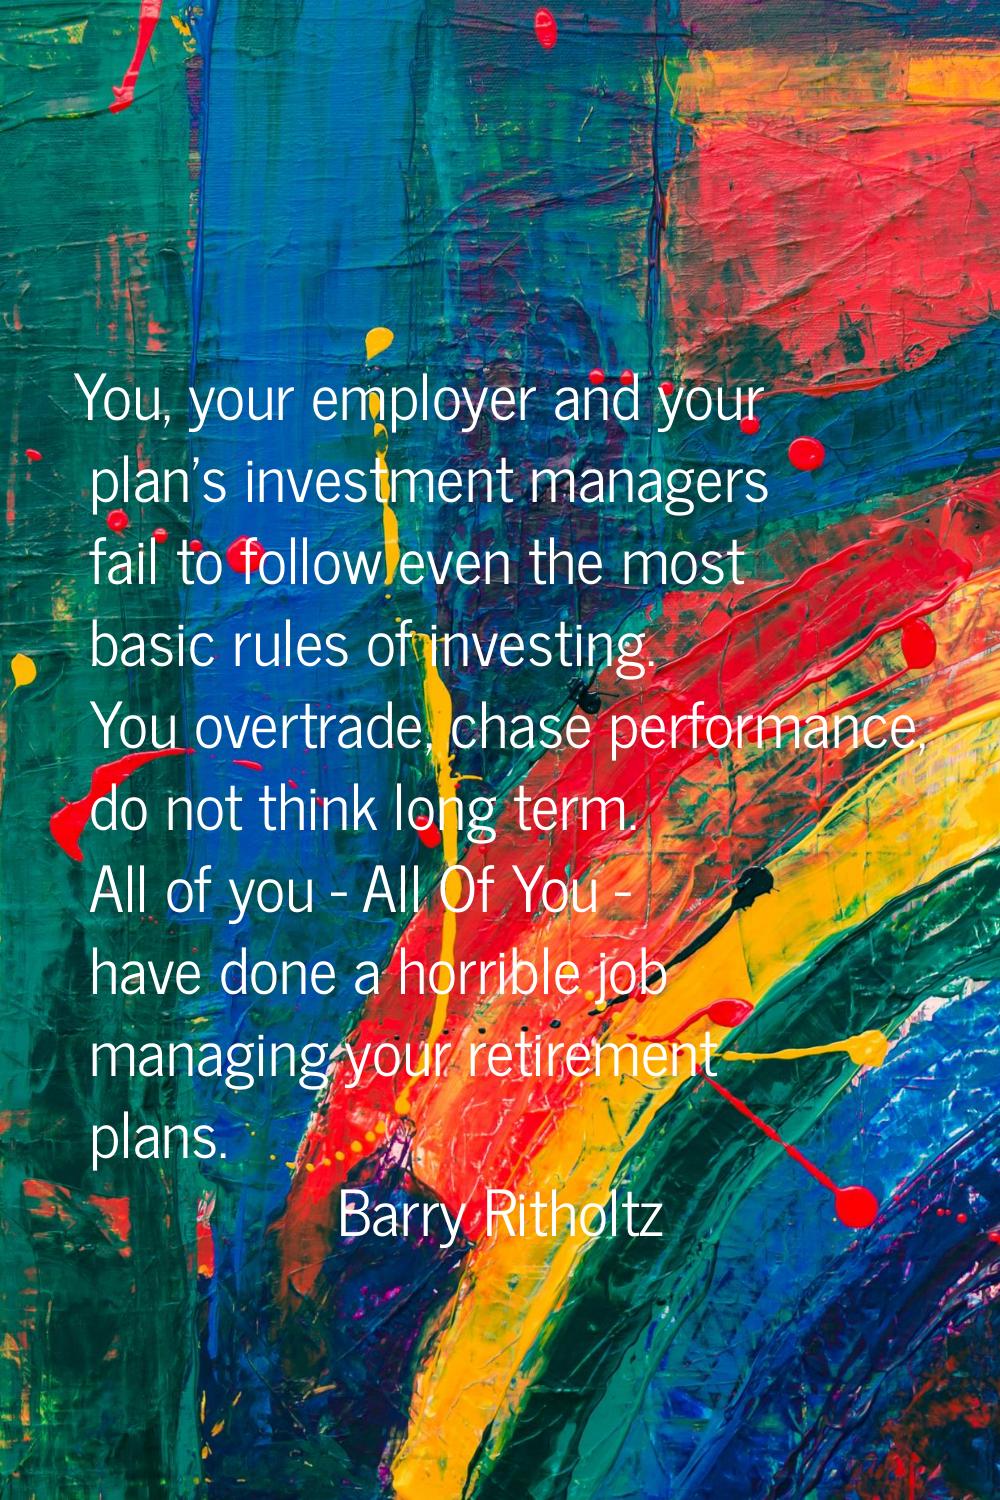 You, your employer and your plan's investment managers fail to follow even the most basic rules of 